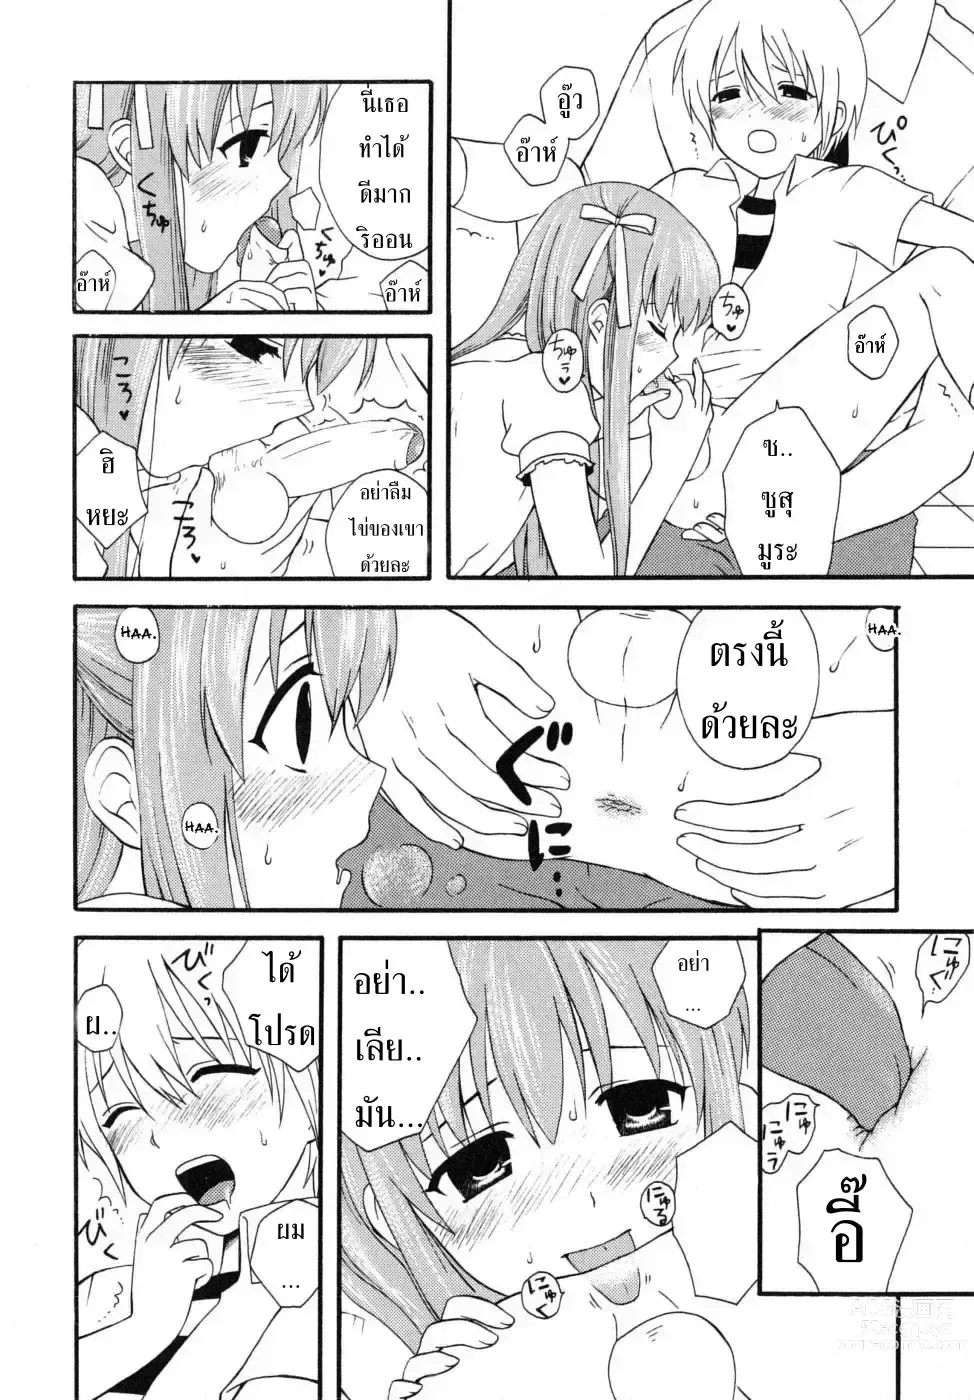 Page 10 of manga แอบมองเธออยู่นะจ๊ะ